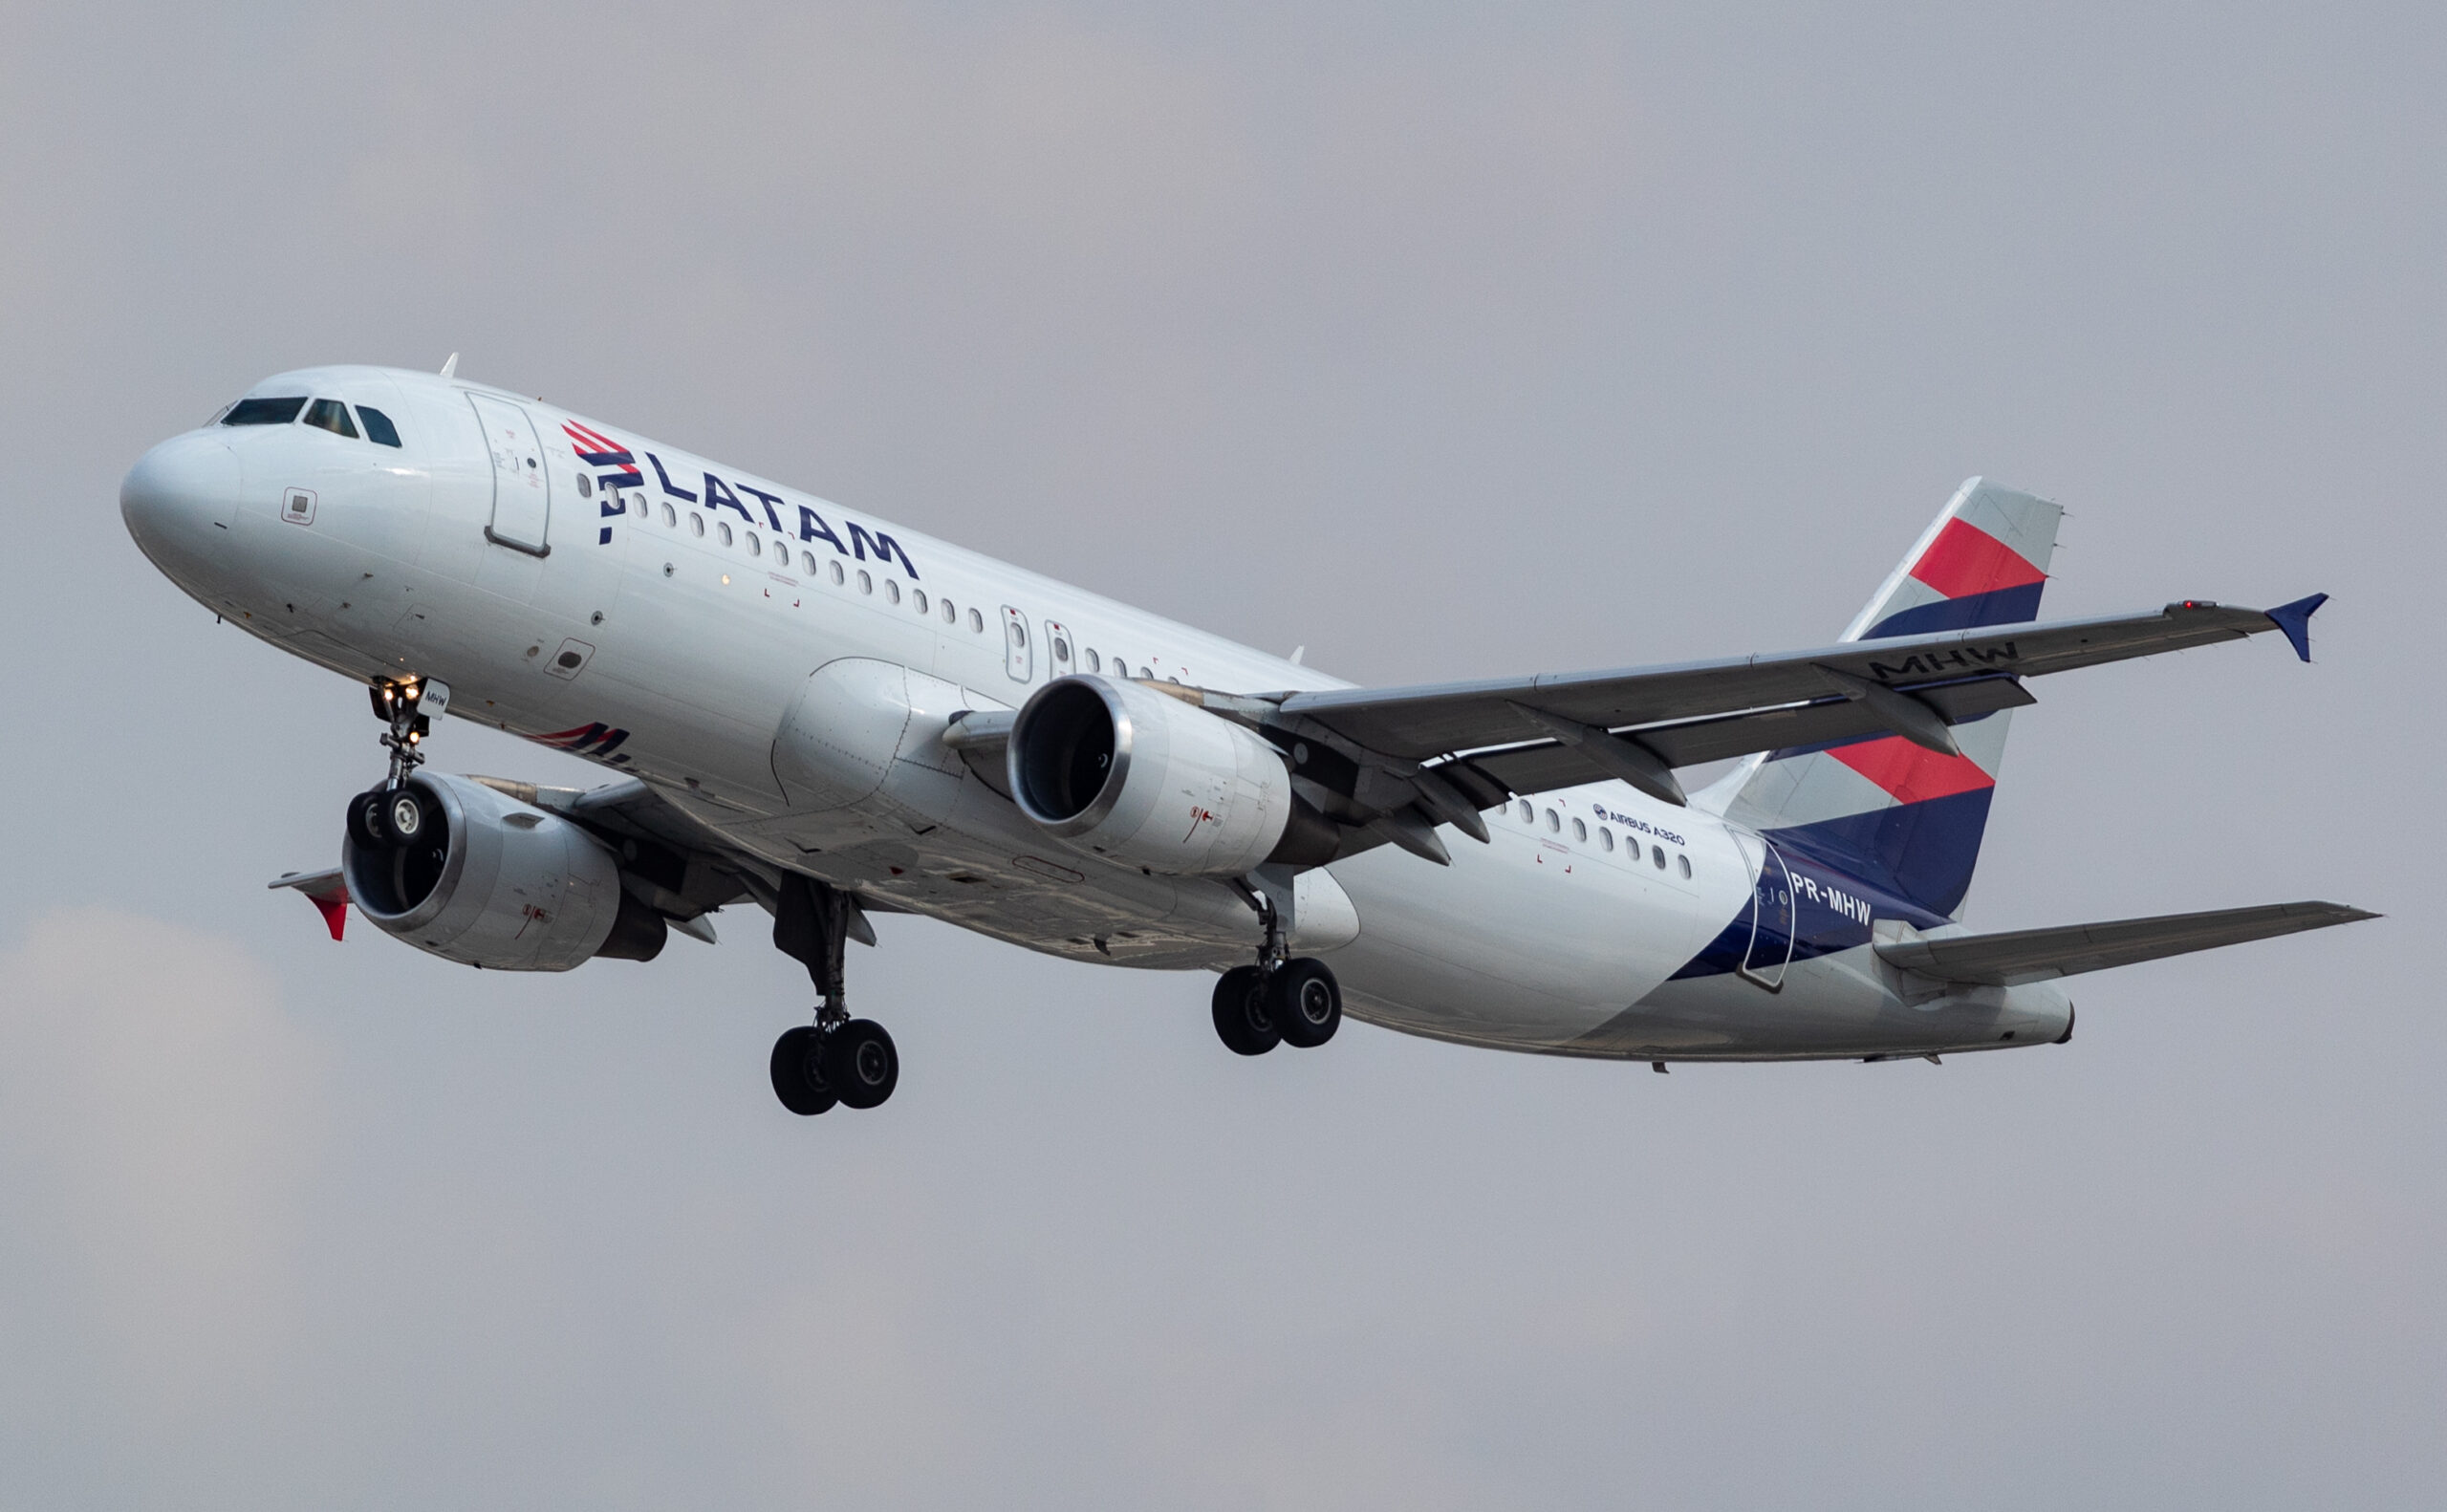 PR-MHW - Airbus A320-214 - LATAM Airlines - Blog do Spotter